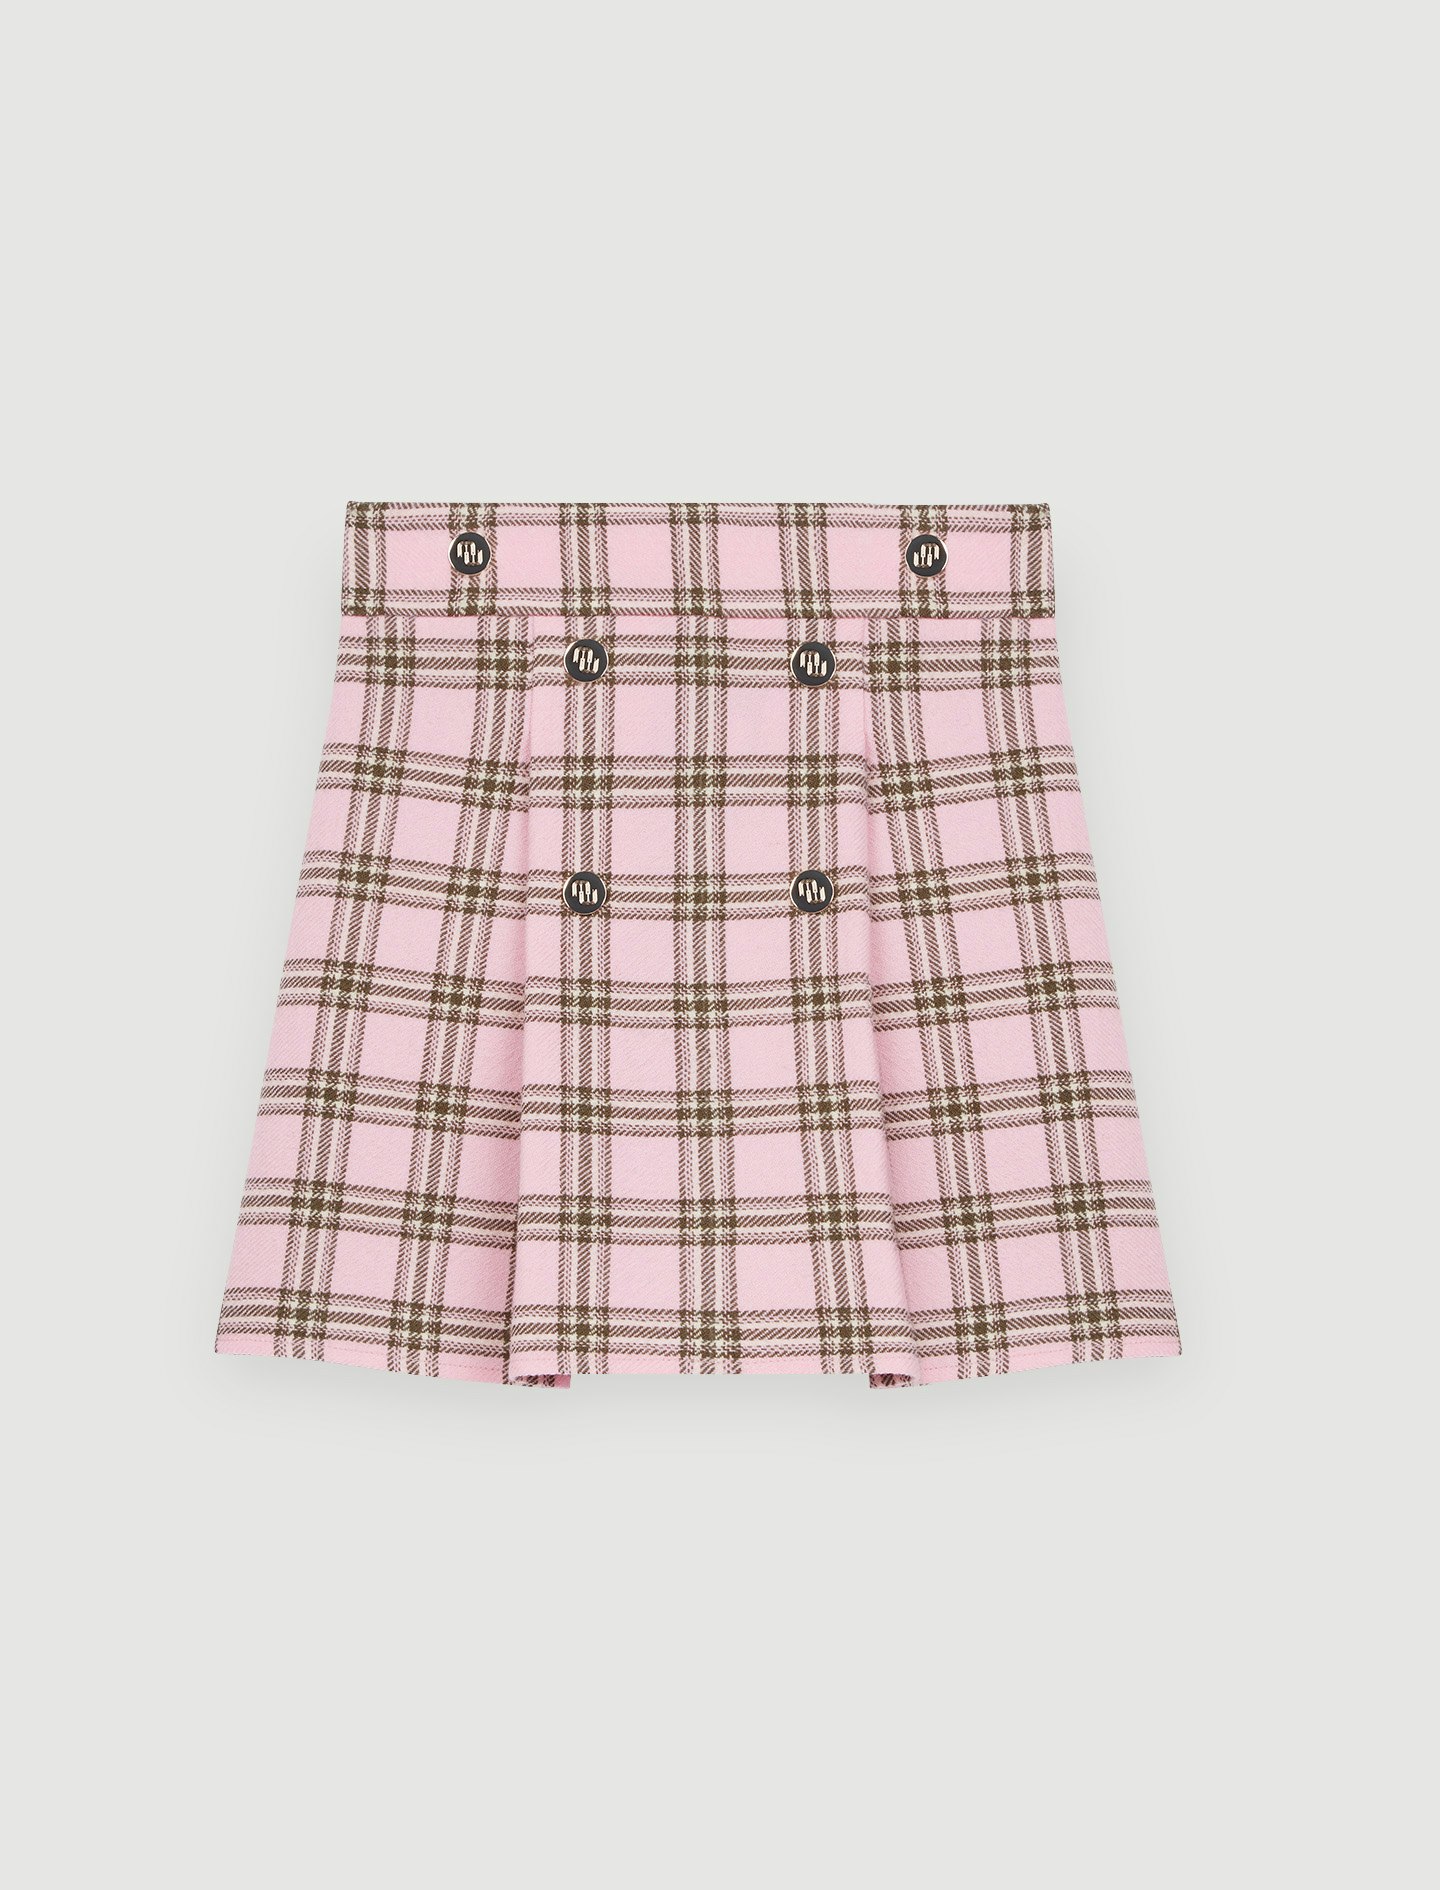 Maje, Checked Pleated Skirt, £219